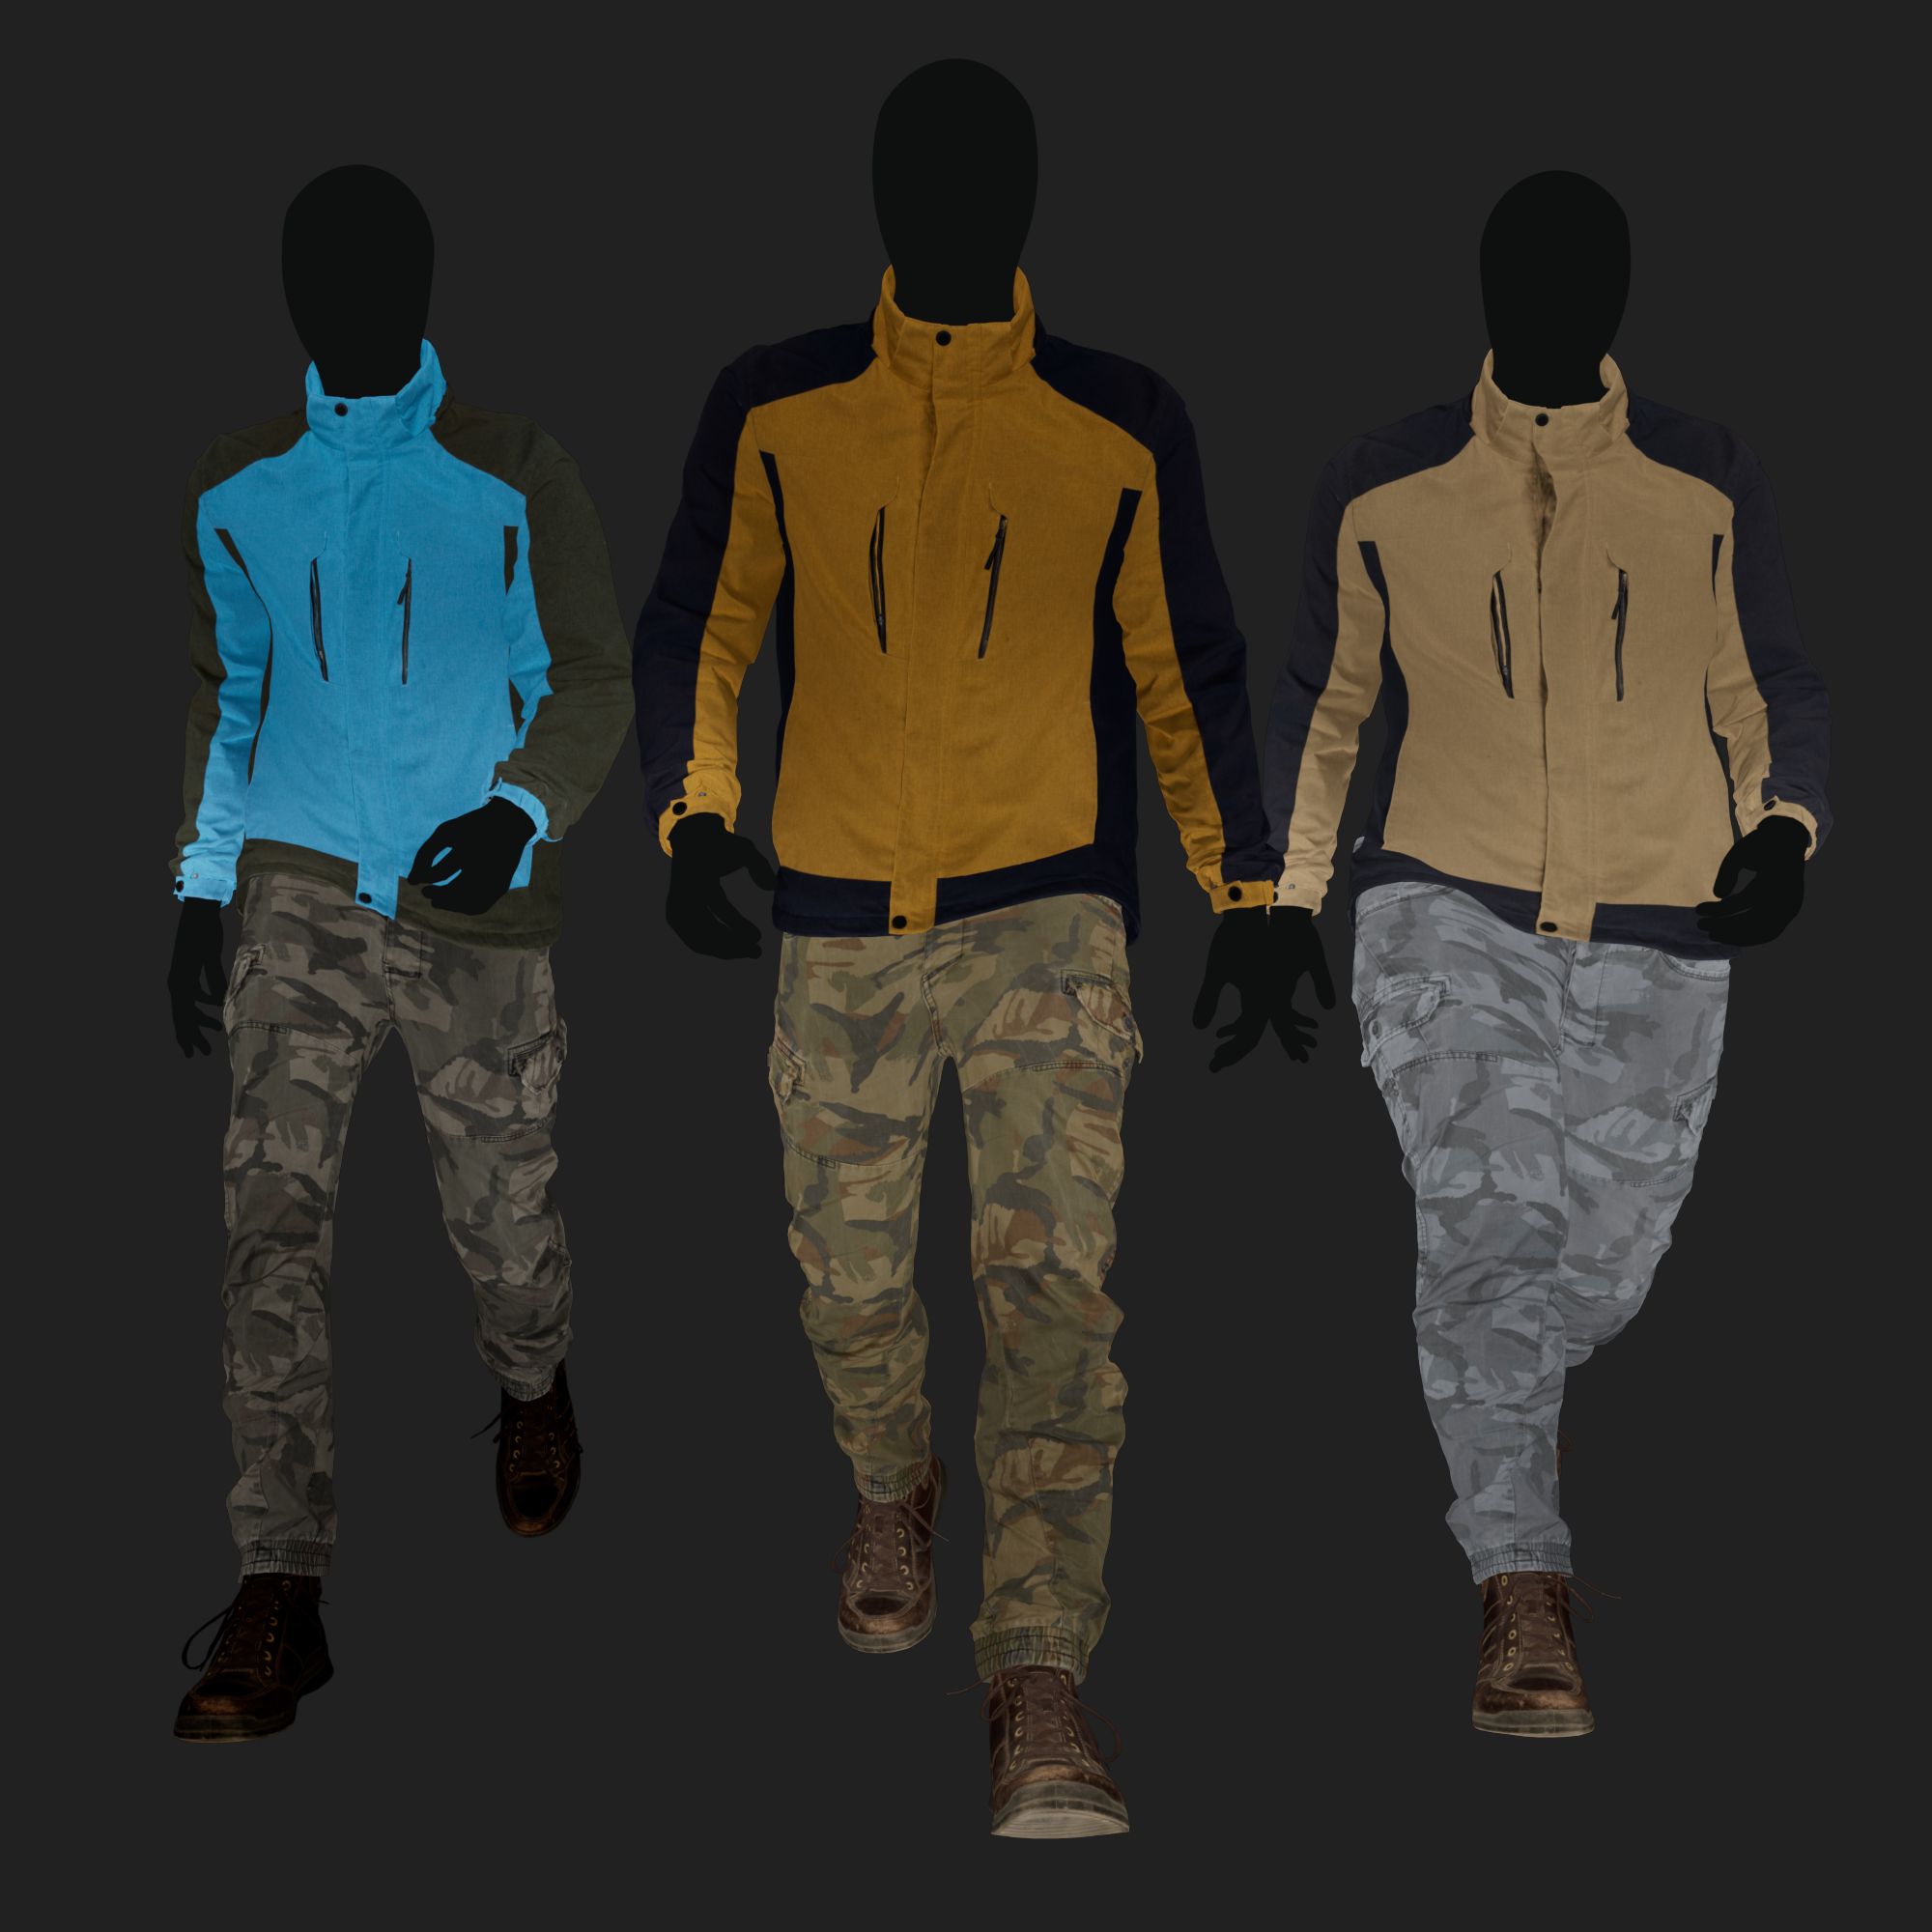 Albedo (Diffuse) map rendering of a 3D model of an animated walking male character dressed in: Sport Jacket, Combat Trousers, Shoes - front view